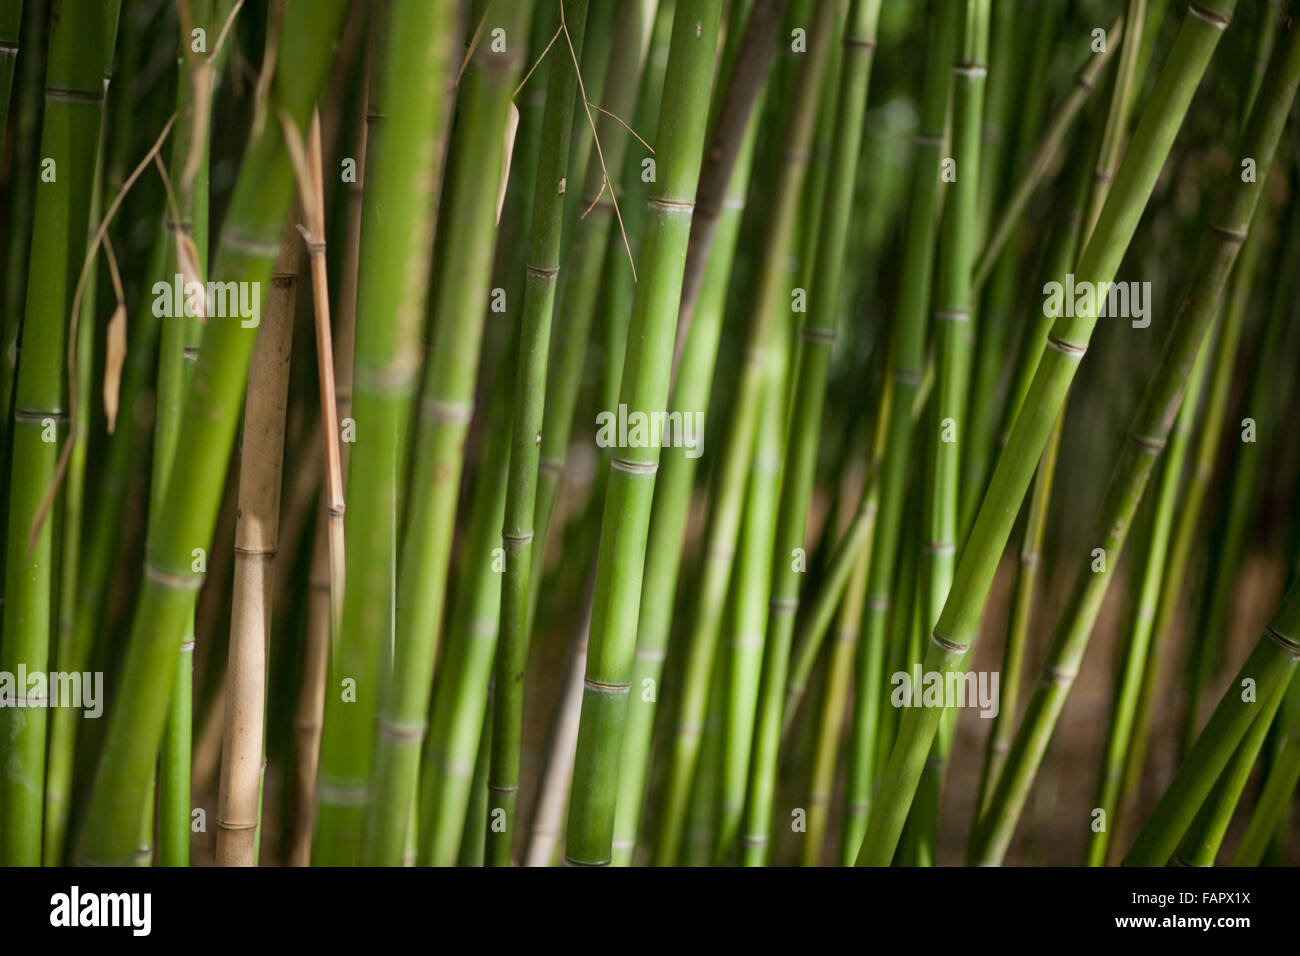 Green bamboo background. Tropical climate Stock Photo